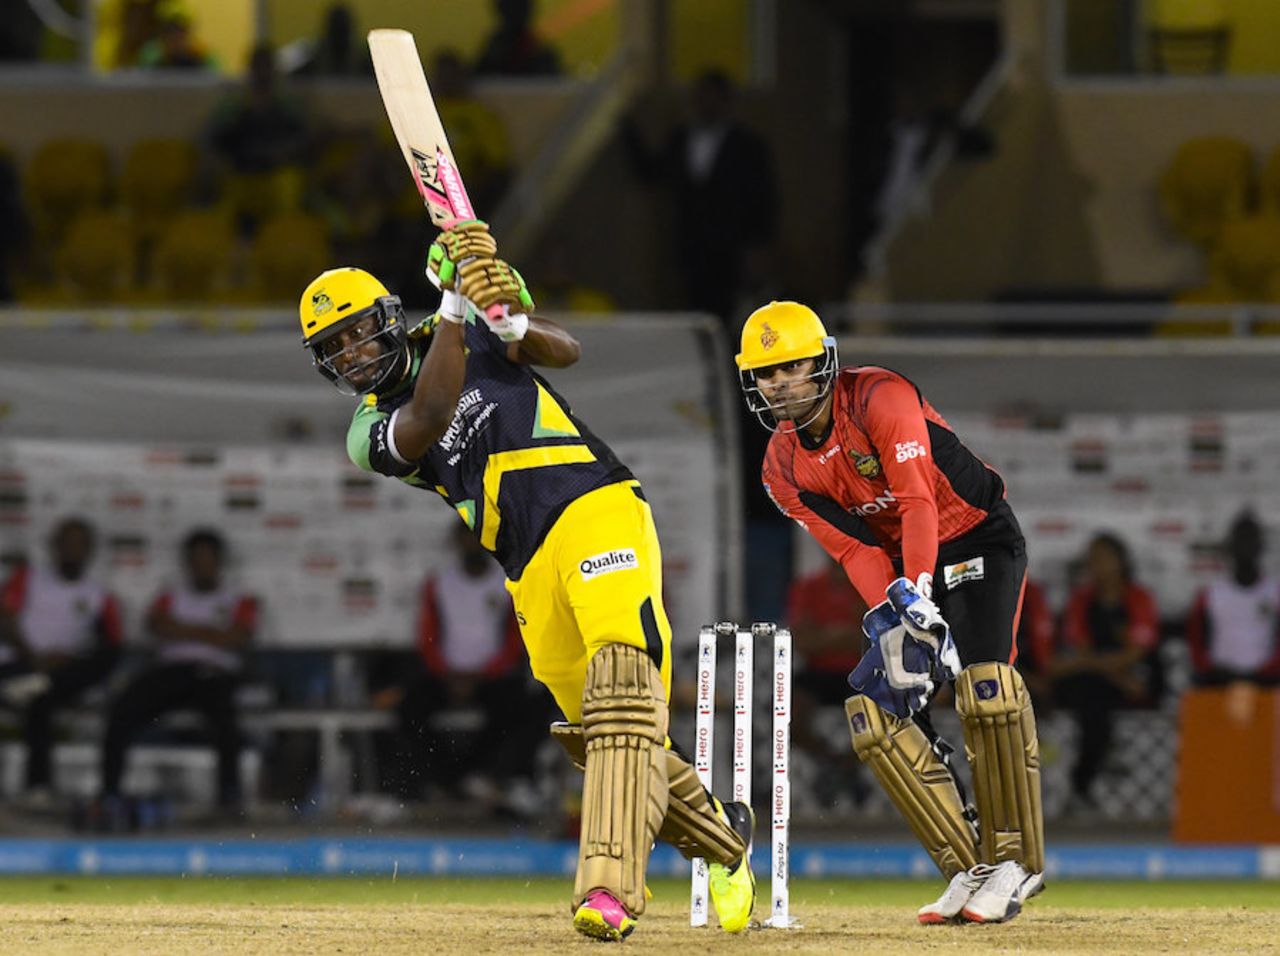 Andre Russell drives down the ground, Trinbago Knight Riders v Jamaica Tallawahs, CPL 2016, Port of Spain, July 4, 2016